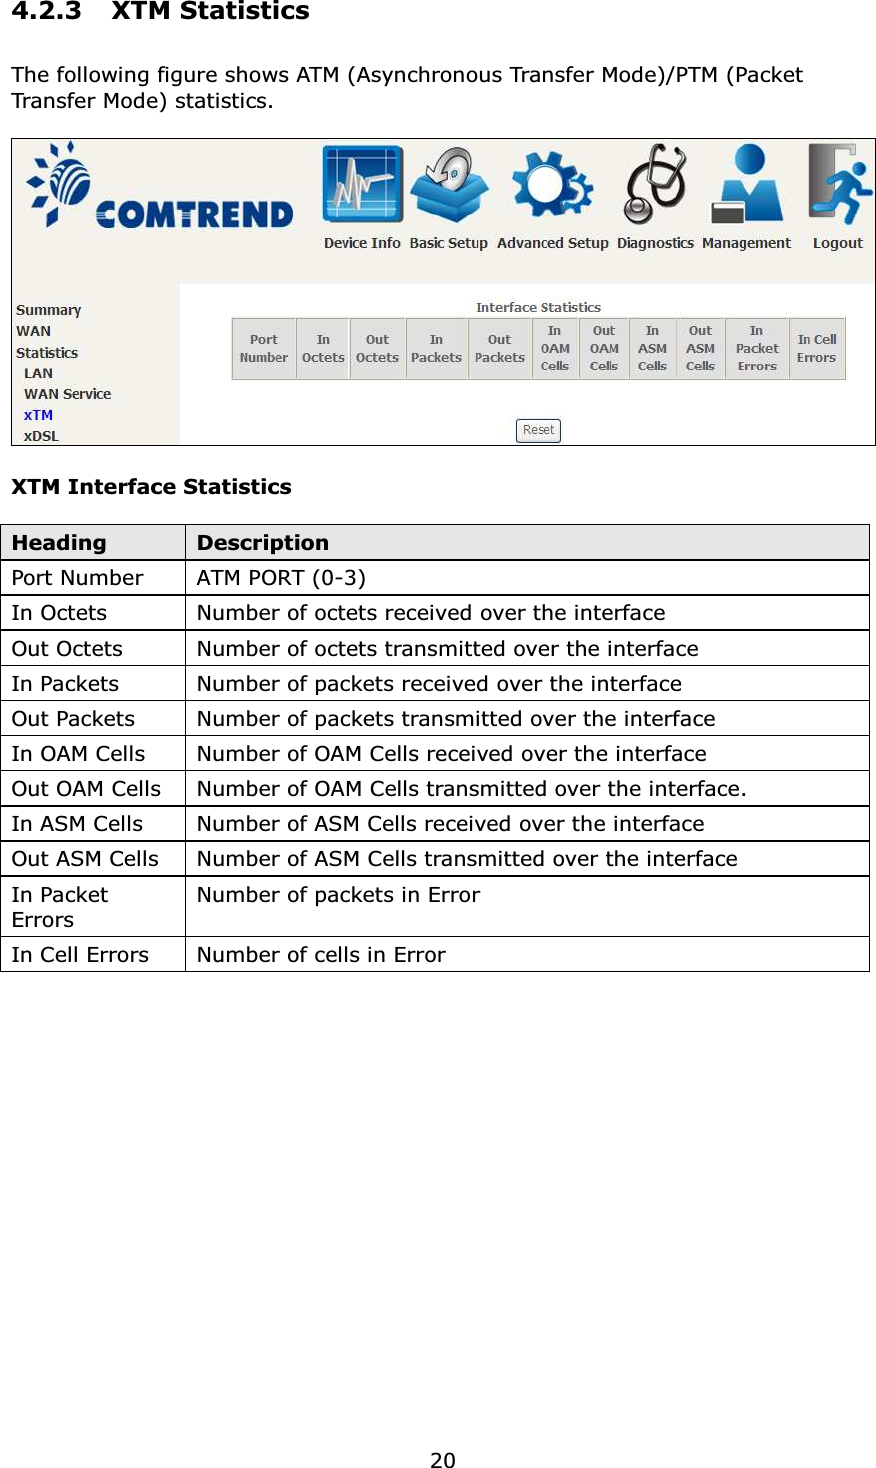  204.2.3 XTM Statistics The following figure shows ATM (Asynchronous Transfer Mode)/PTM (Packet Transfer Mode) statistics.   XTM Interface Statistics  Heading  Description Port Number  ATM PORT (0-3) In Octets  Number of octets received over the interface Out Octets  Number of octets transmitted over the interface In Packets  Number of packets received over the interface Out Packets  Number of packets transmitted over the interface In OAM Cells  Number of OAM Cells received over the interface Out OAM Cells  Number of OAM Cells transmitted over the interface. In ASM Cells  Number of ASM Cells received over the interface Out ASM Cells  Number of ASM Cells transmitted over the interface In Packet Errors Number of packets in Error In Cell Errors  Number of cells in Error      